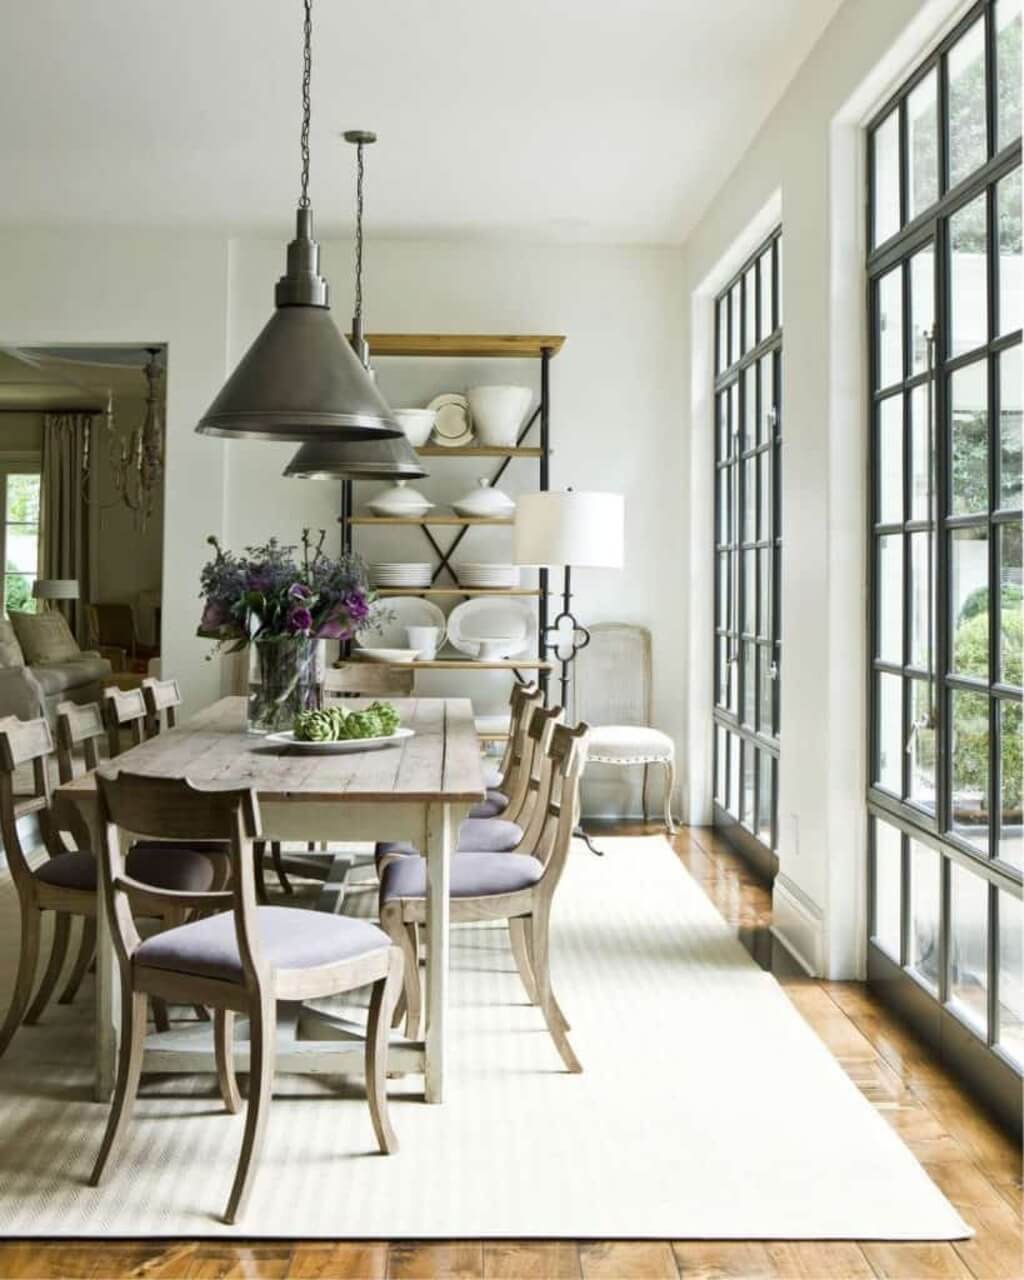 French Window “Walls” for Dining Room: large windows